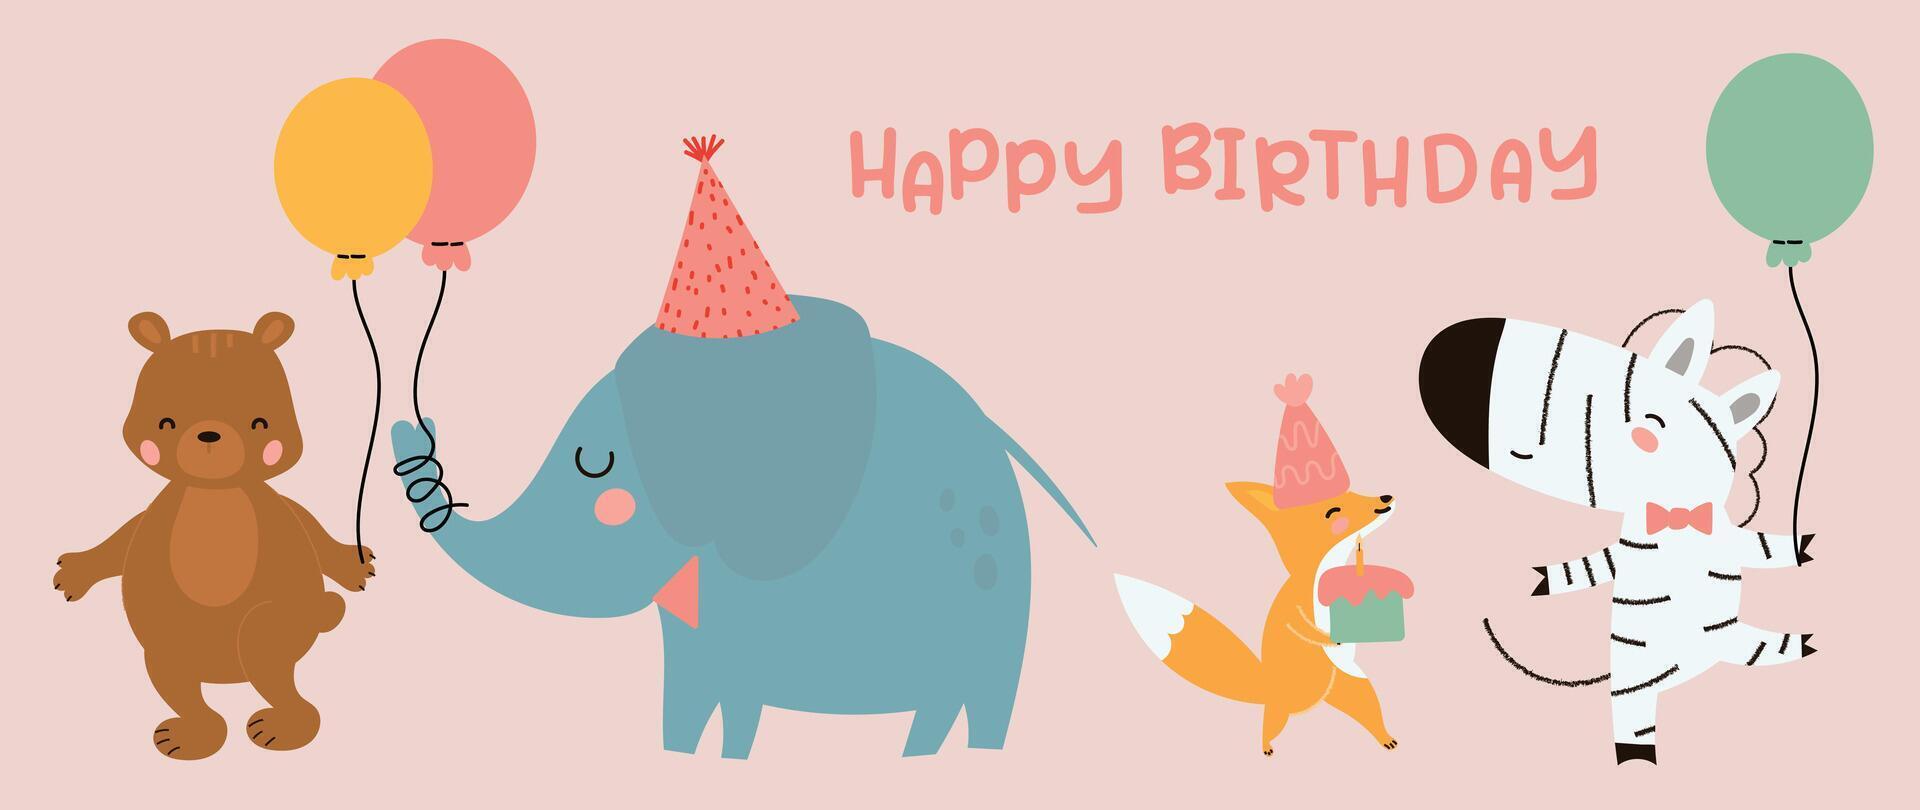 Happy birthday concept animal vector set. Collection of adorable wildlife, bear, elephant, fox, zebra. Birthday party funny animal character illustration for greeting card, kids, education.